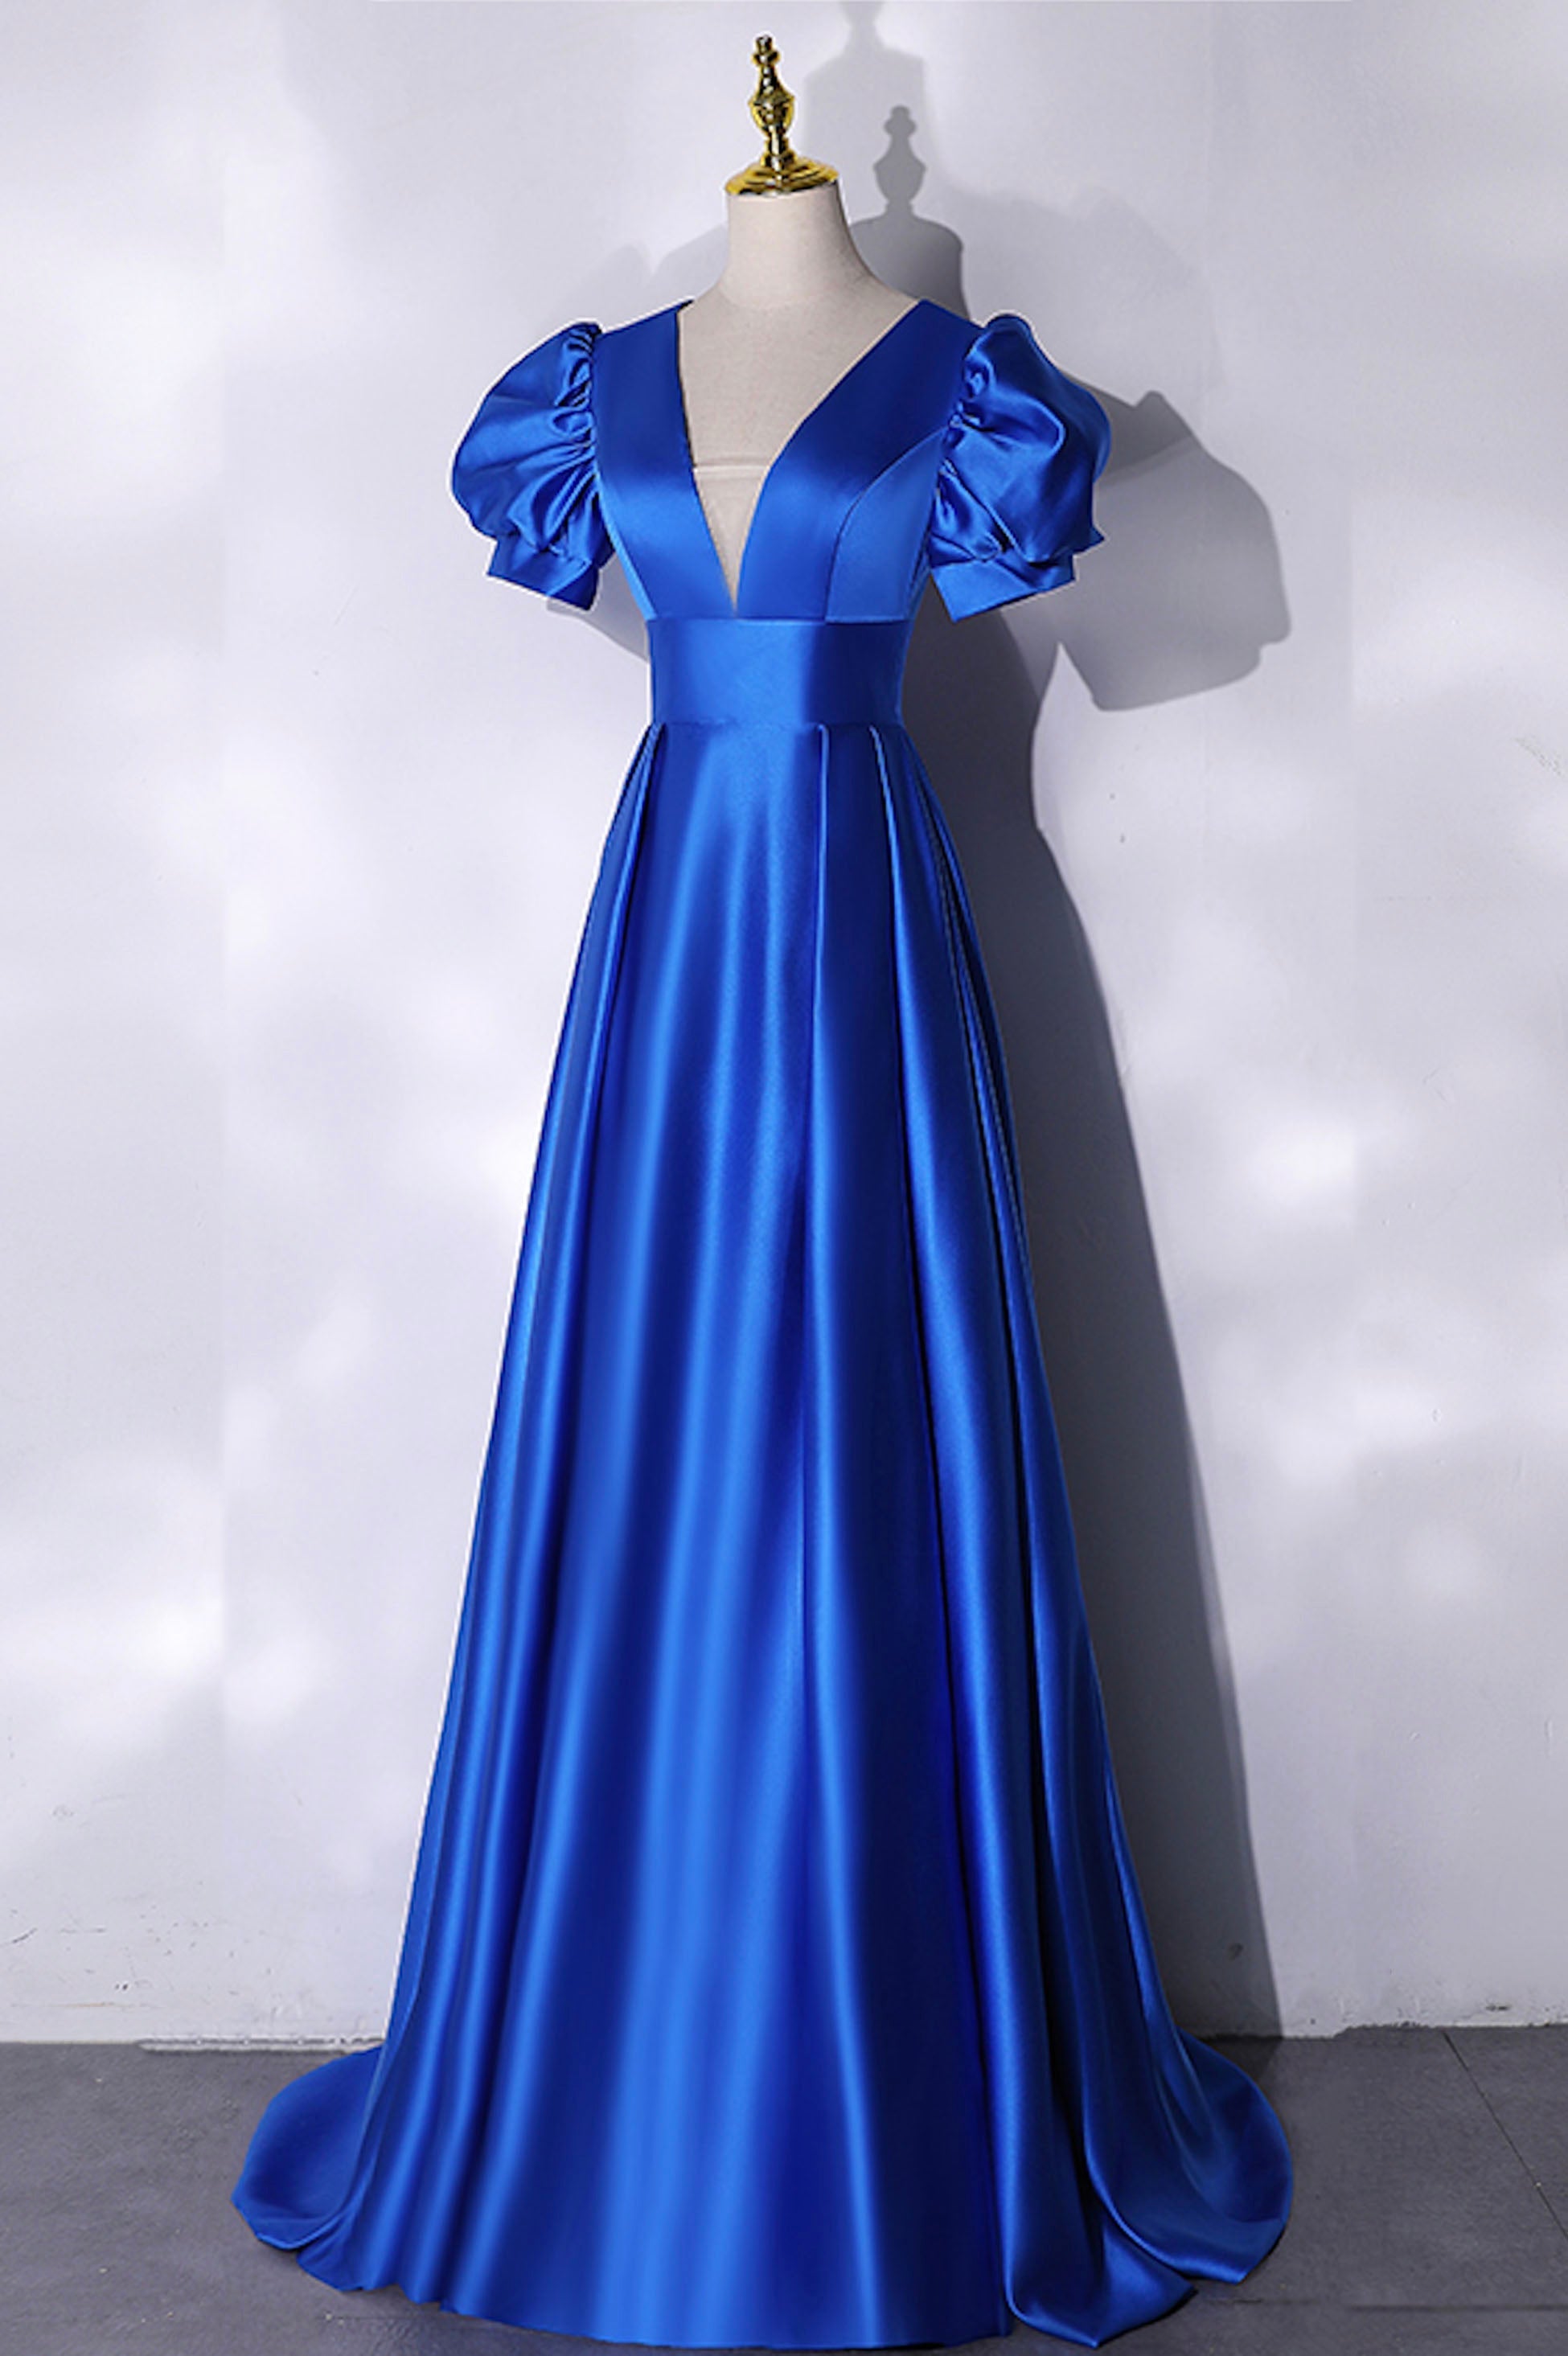 Party Dress Midi With Sleeves, Blue V-Neck Satin Long Prom Dress, Simple Blue Evening Party Dress